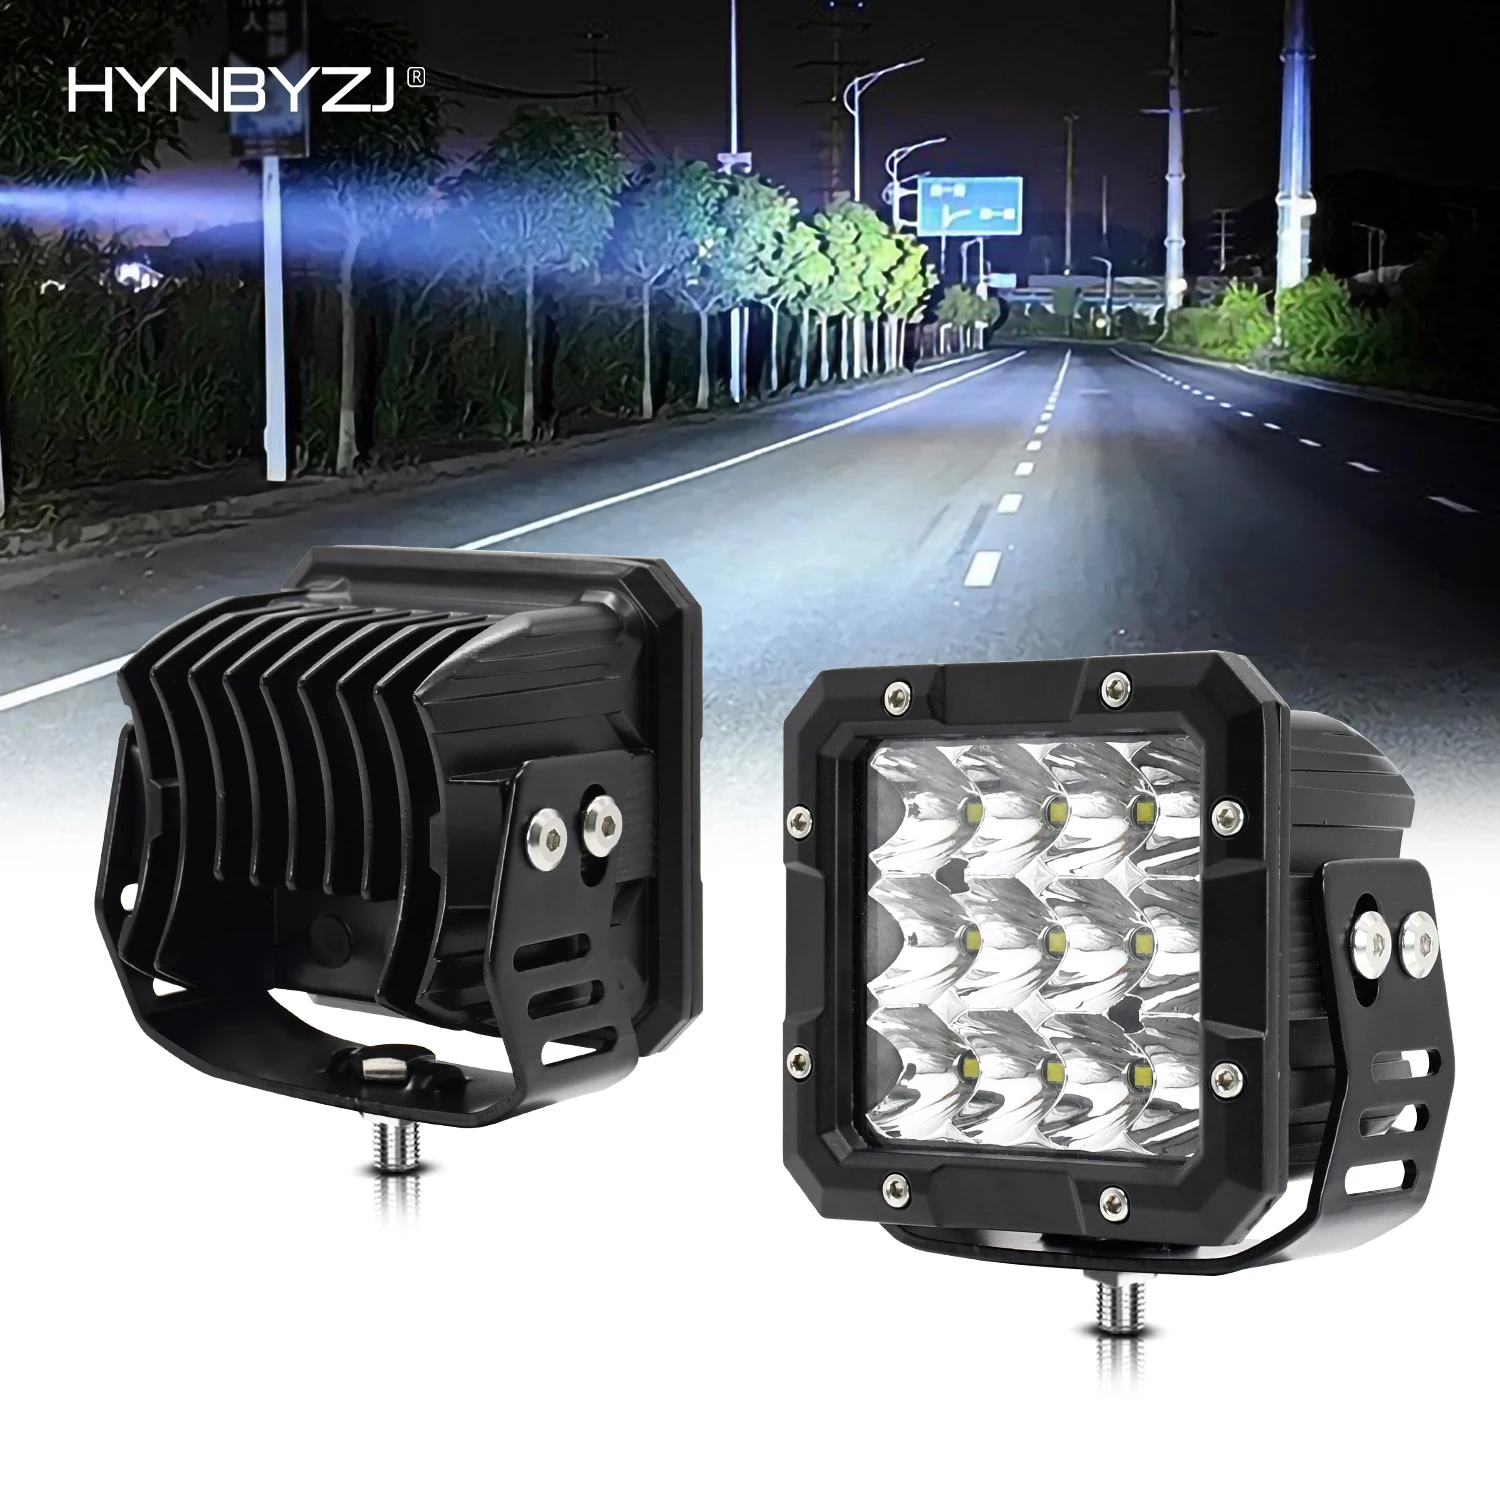 

HYNBYZJ LED Driving Lights 6 inch 158W Work Light Spot Flood Combo Beam Offroad LED POD Lamp DRL with DT Plug Wiring Harness